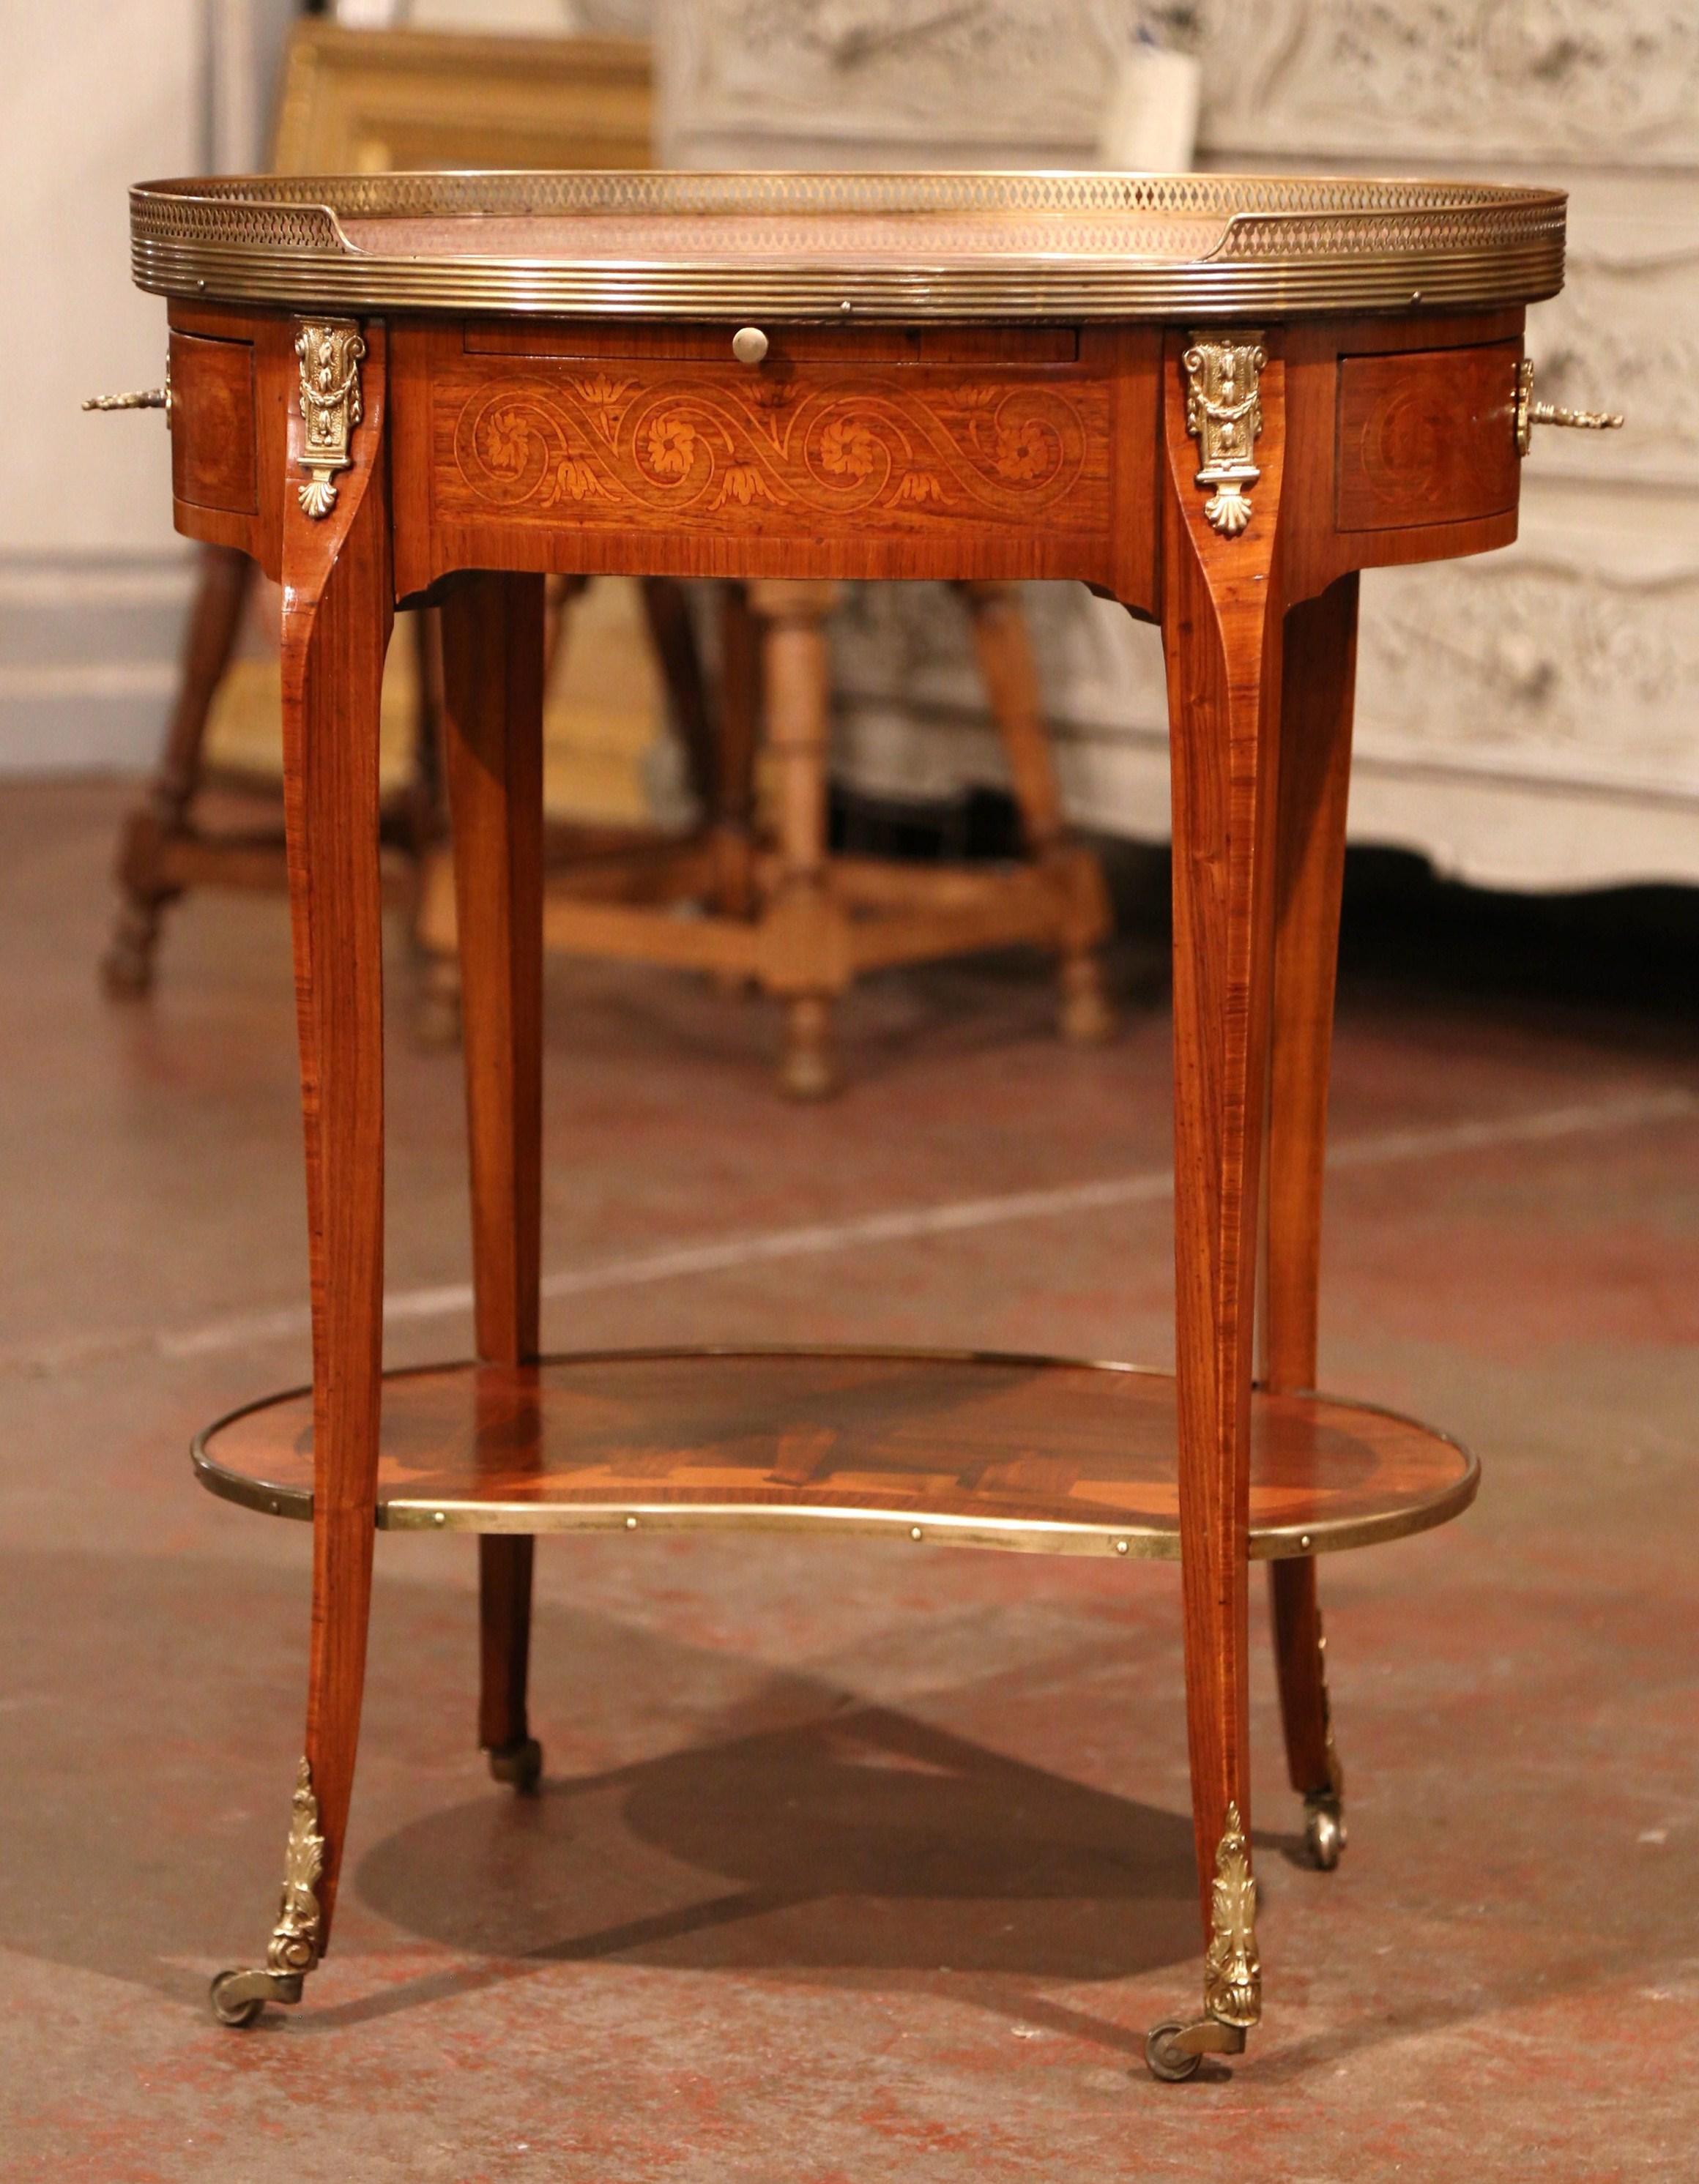 Crafted in France circa 1940 and made of cherry, the elegant table stands on four cabriole legs embellished with brass mounts over the feet and wheels at the bottom. Oval in shape, the table features detailed inlay and marquetry floral decor around